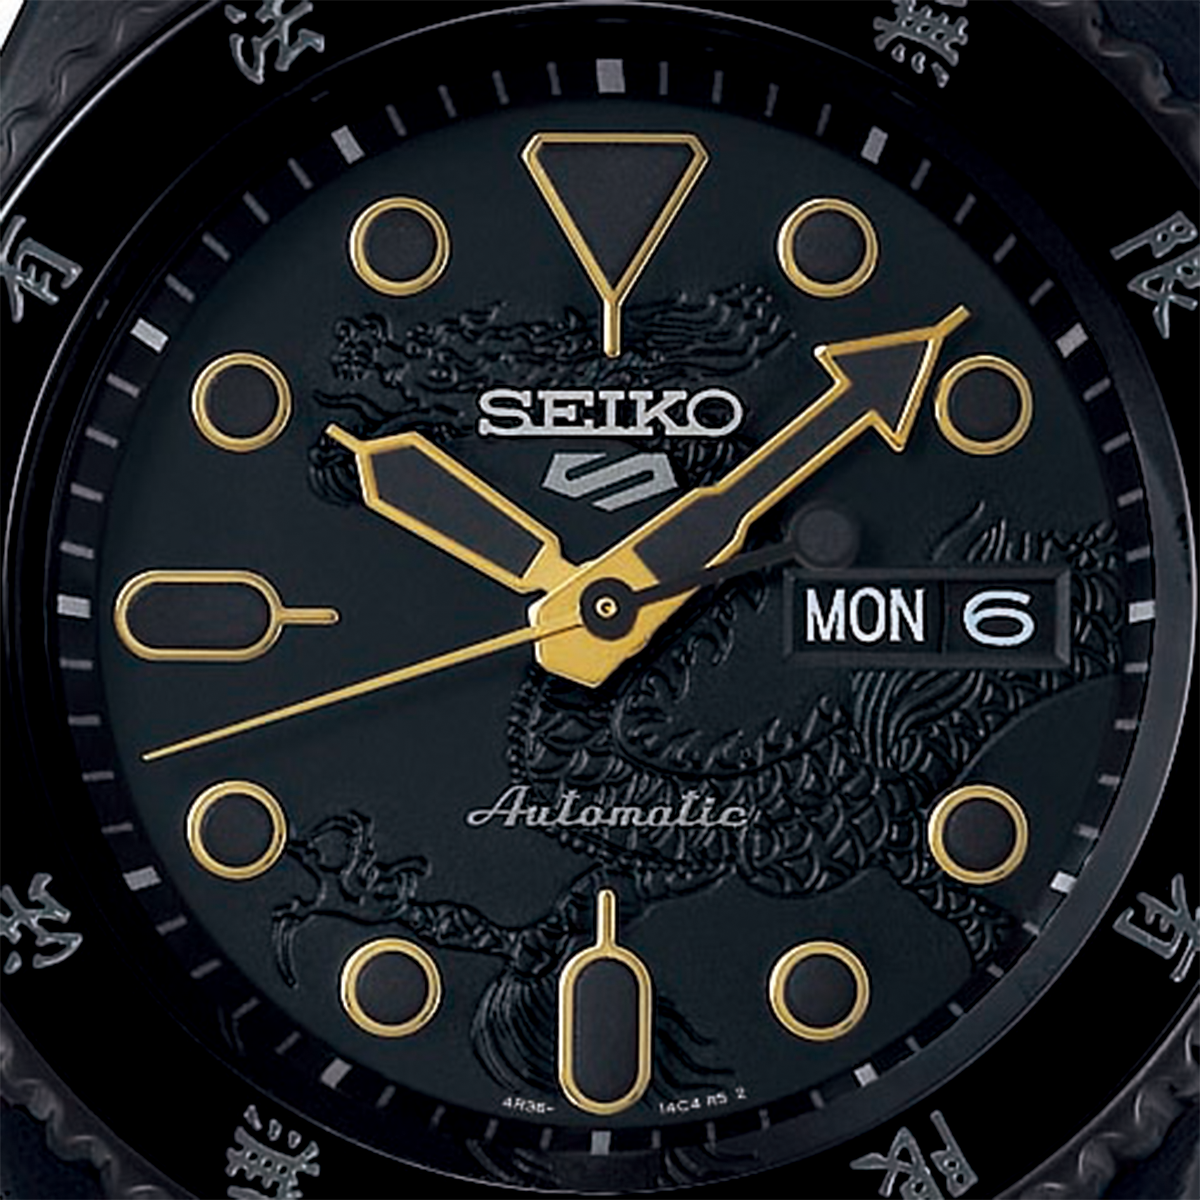 Seiko 5 Sports Bruce Lee Limited Edition - SRPK391K1 